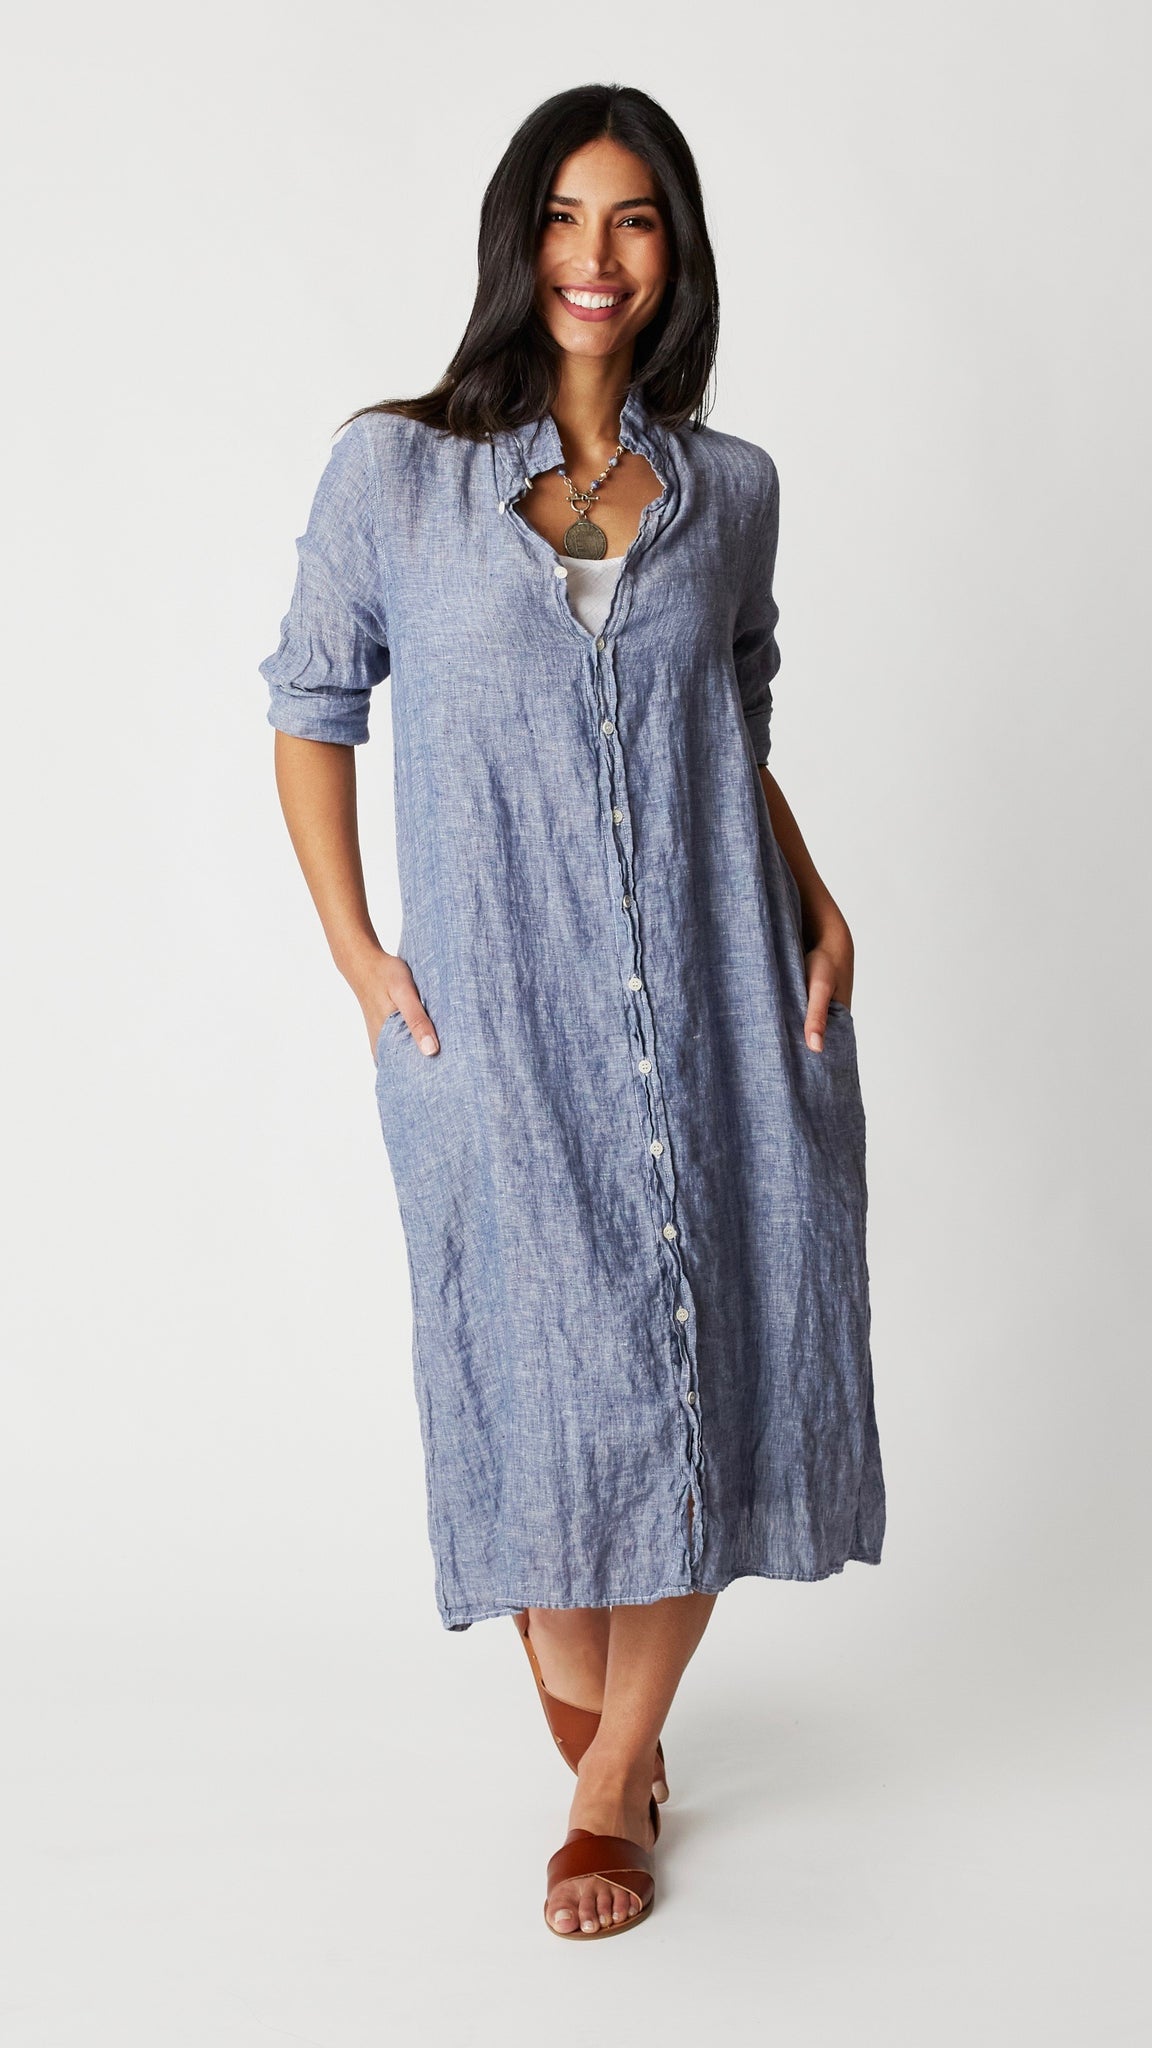 Model wearing chambray linen button-up, duster length, shirtdress with collar and brown leather sandals.